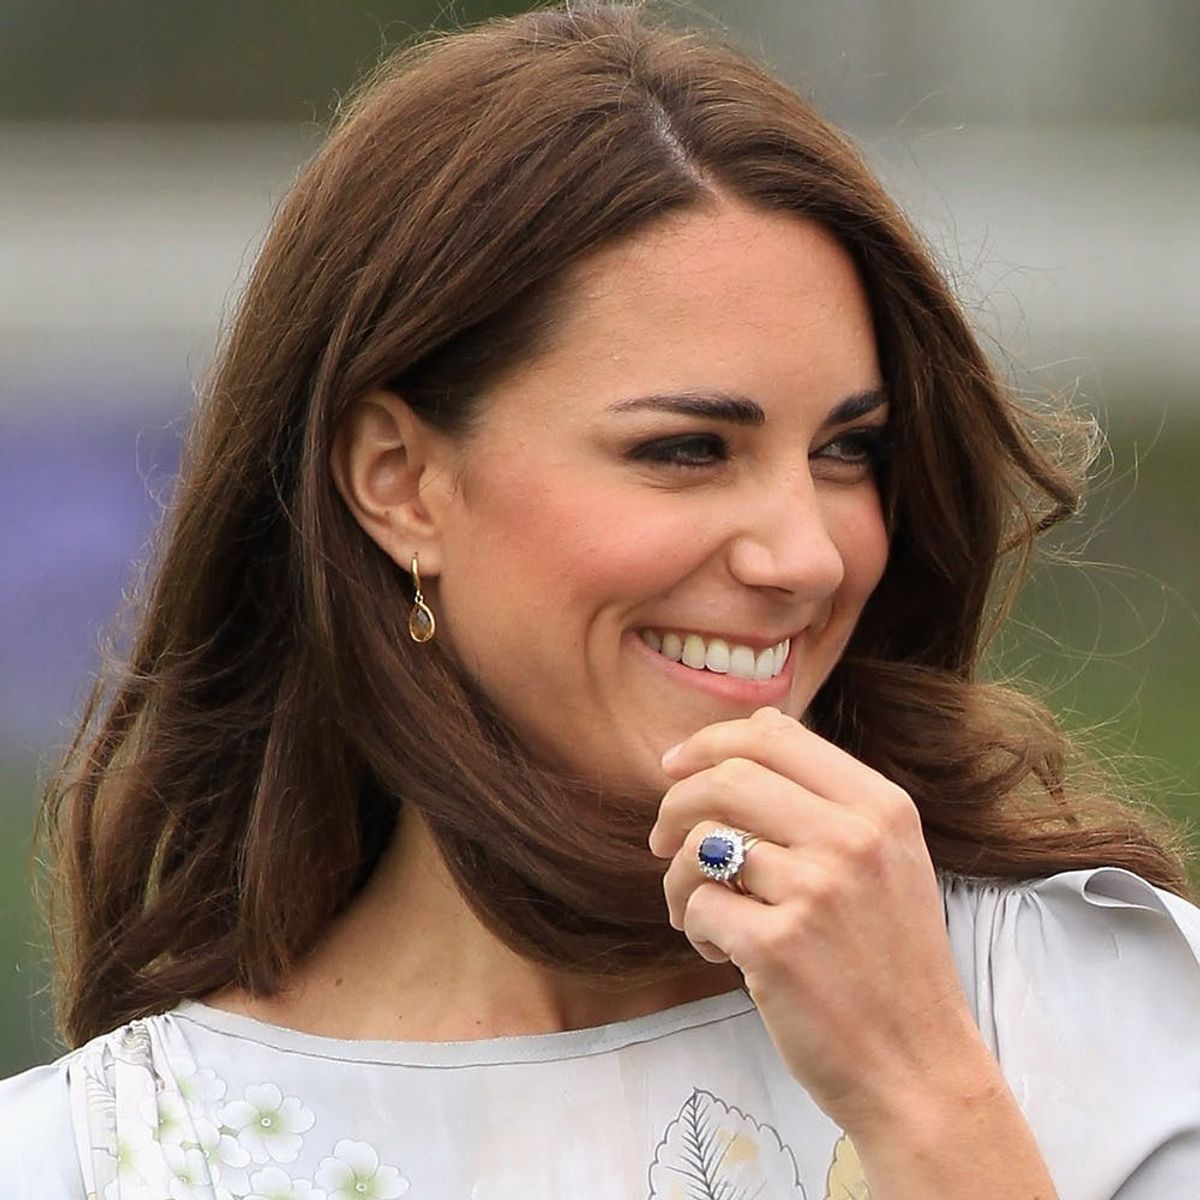 The Real Reason Kate Middleton’s Engagement Ring Is Blue